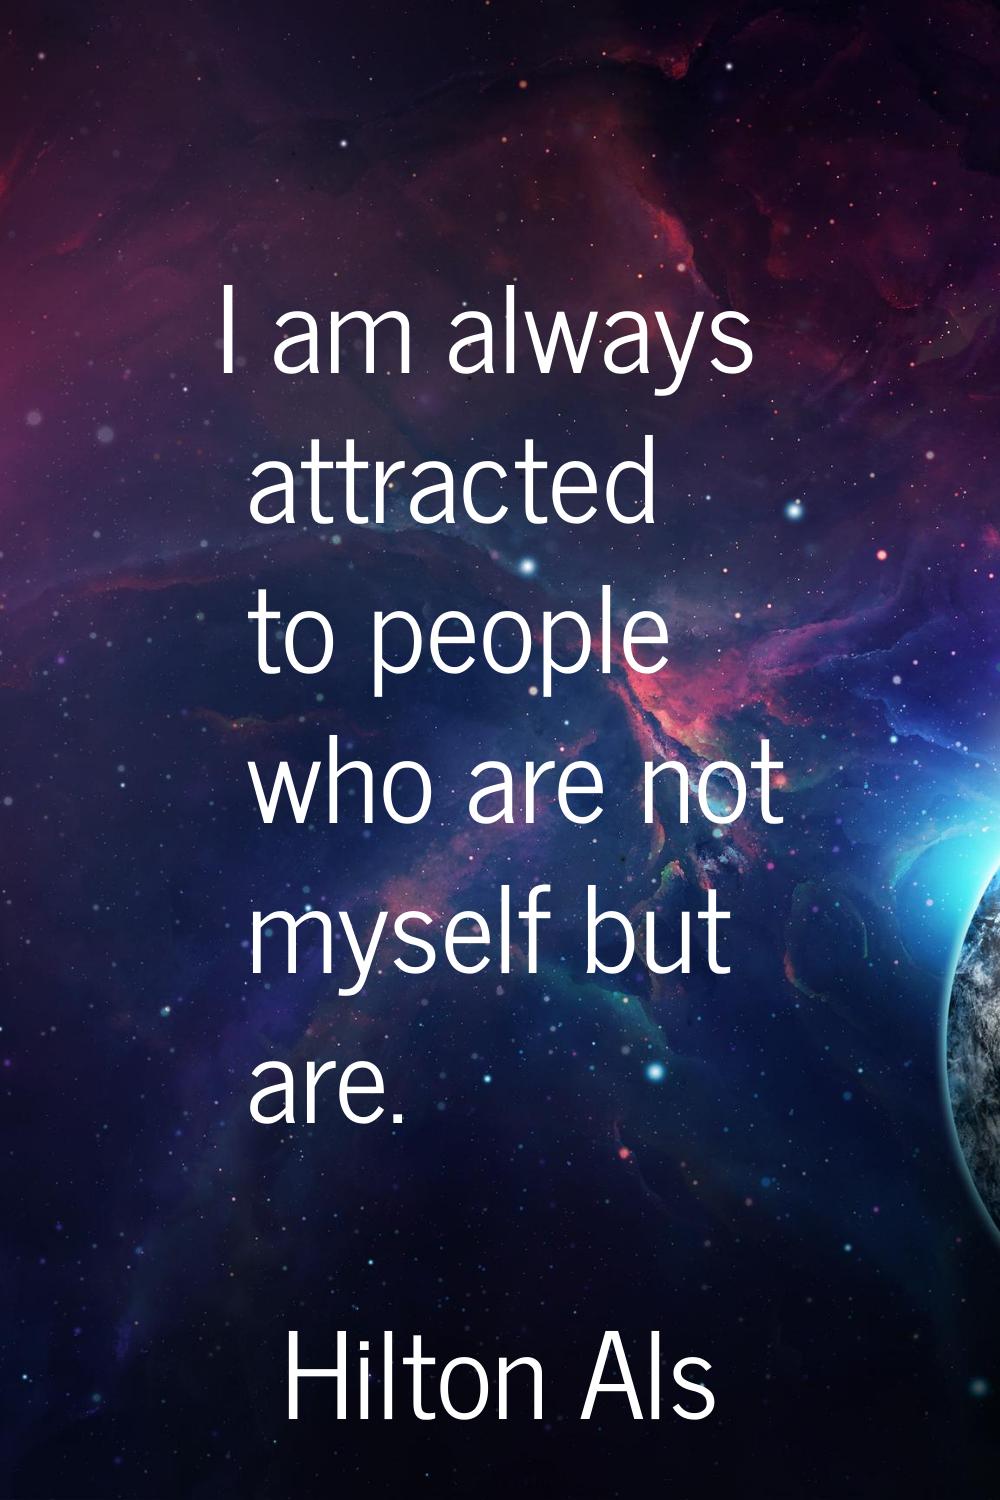 I am always attracted to people who are not myself but are.